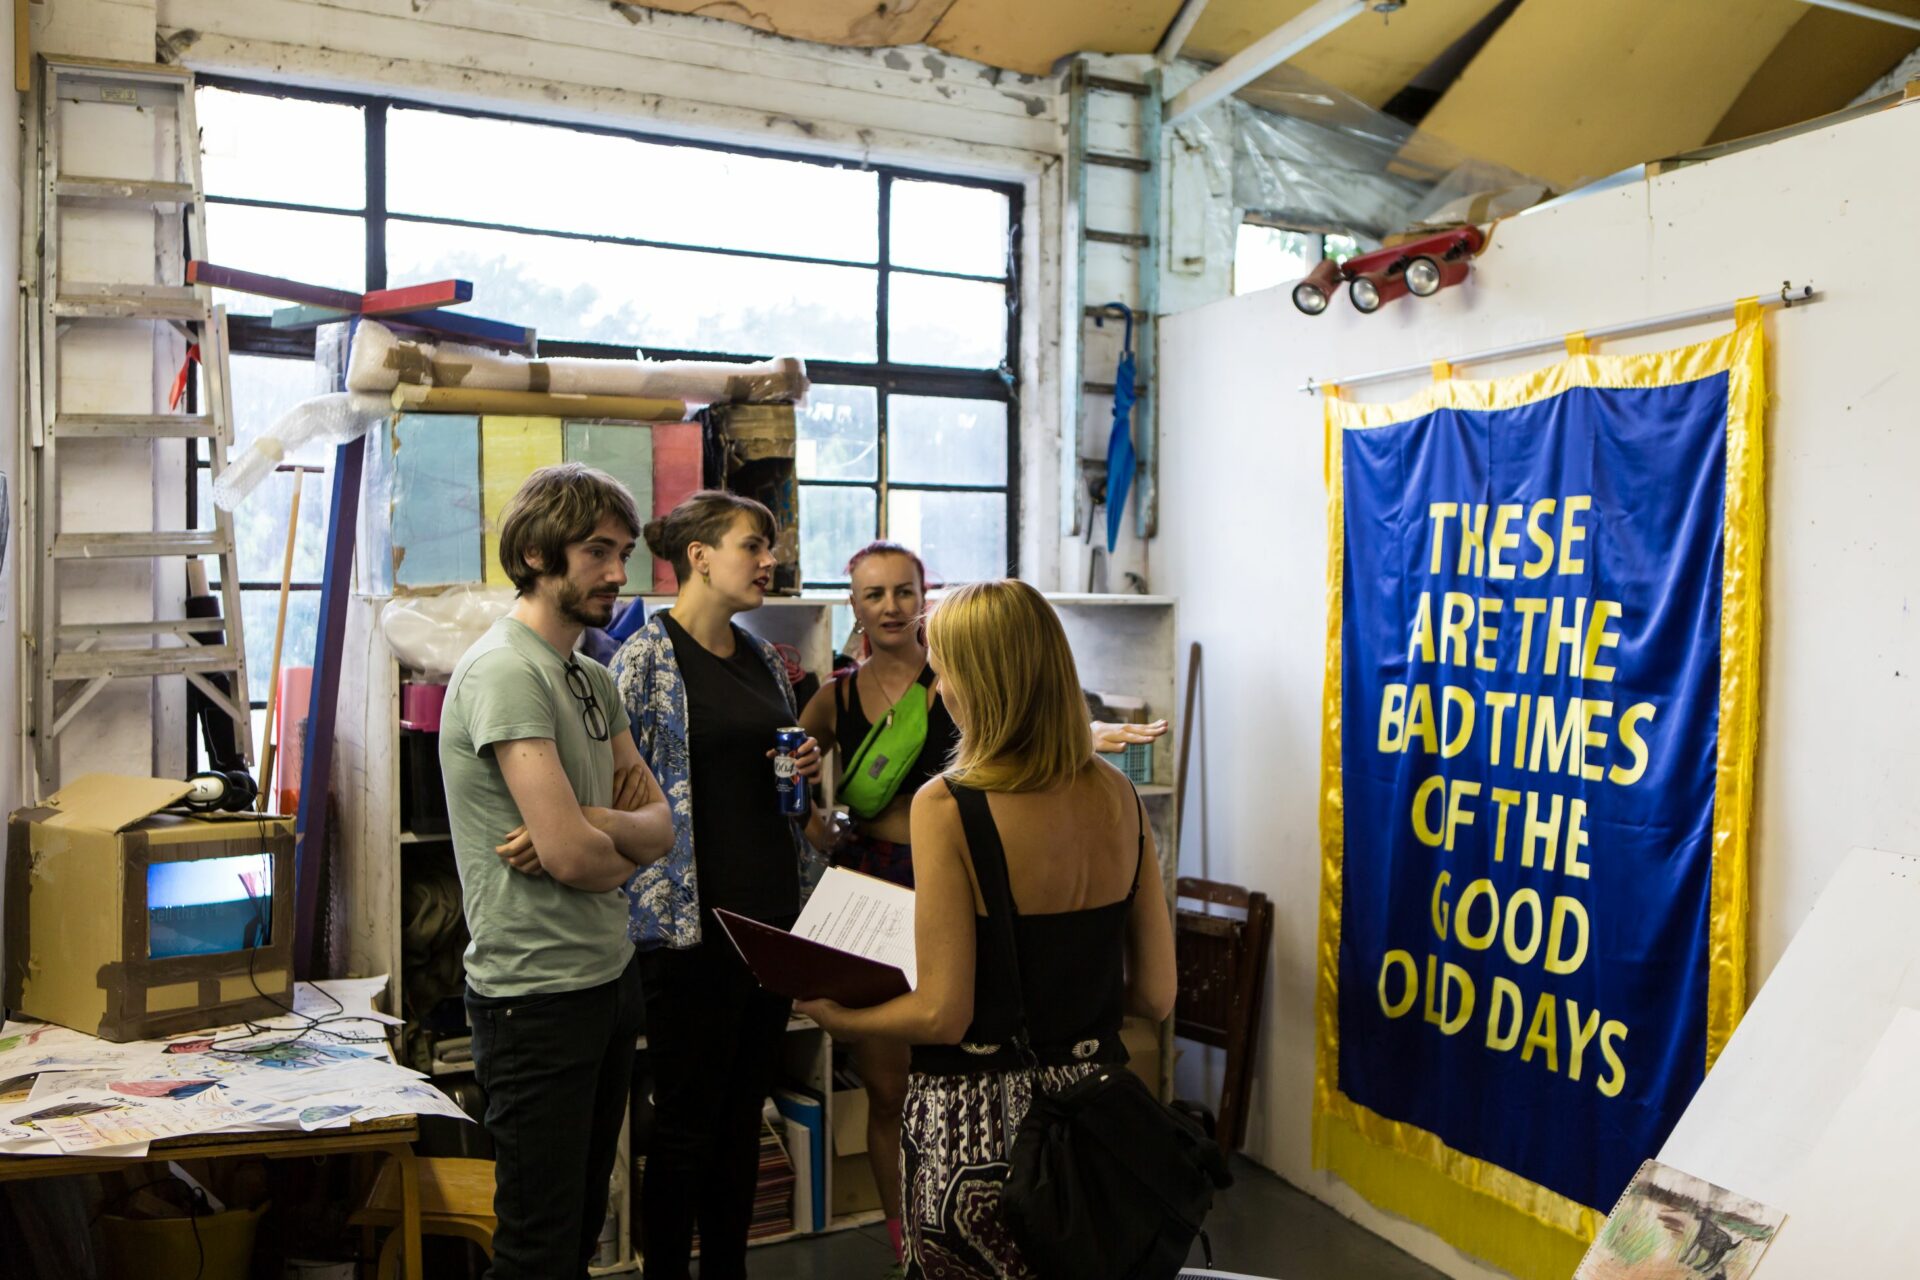 An artist talks to people in their studio, a banner hangs on the wall next to them